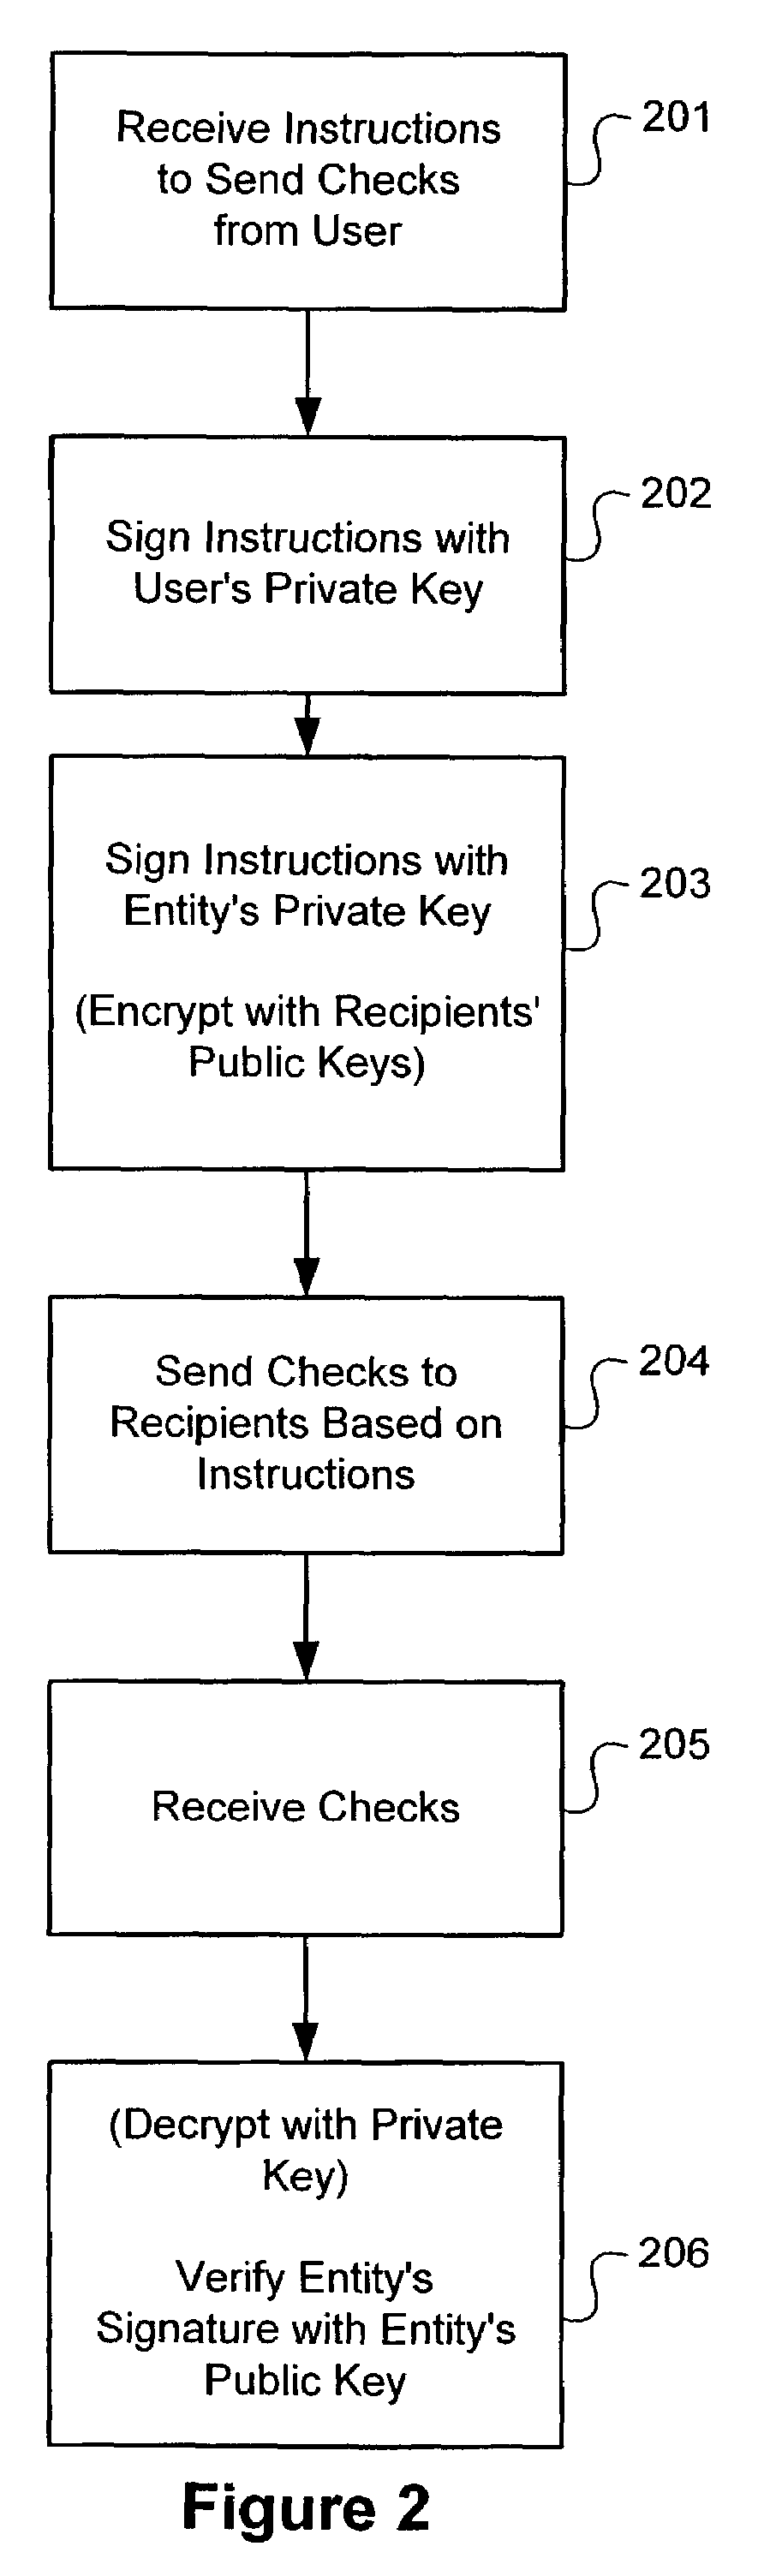 System and method for electronic authorization of batch checks